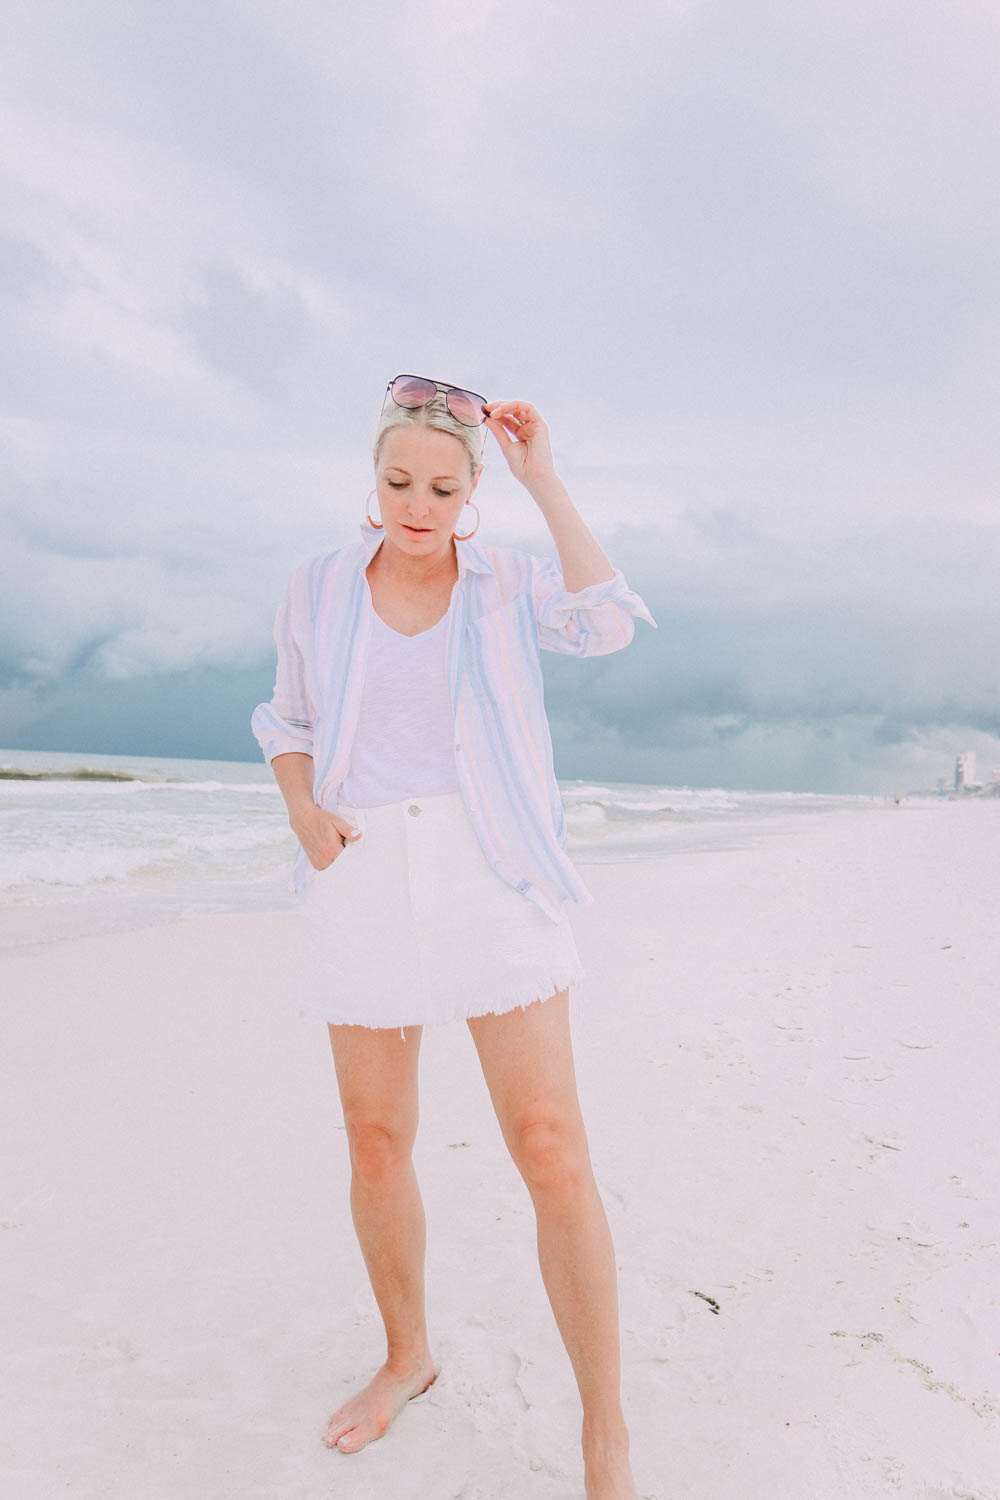 Skorts, Fashion blogger Erin Busbee of BusbeeStyle.com wearing a white denim skort fro Revolve with a Madewell tee and Rails striped button down on the beach in Florida